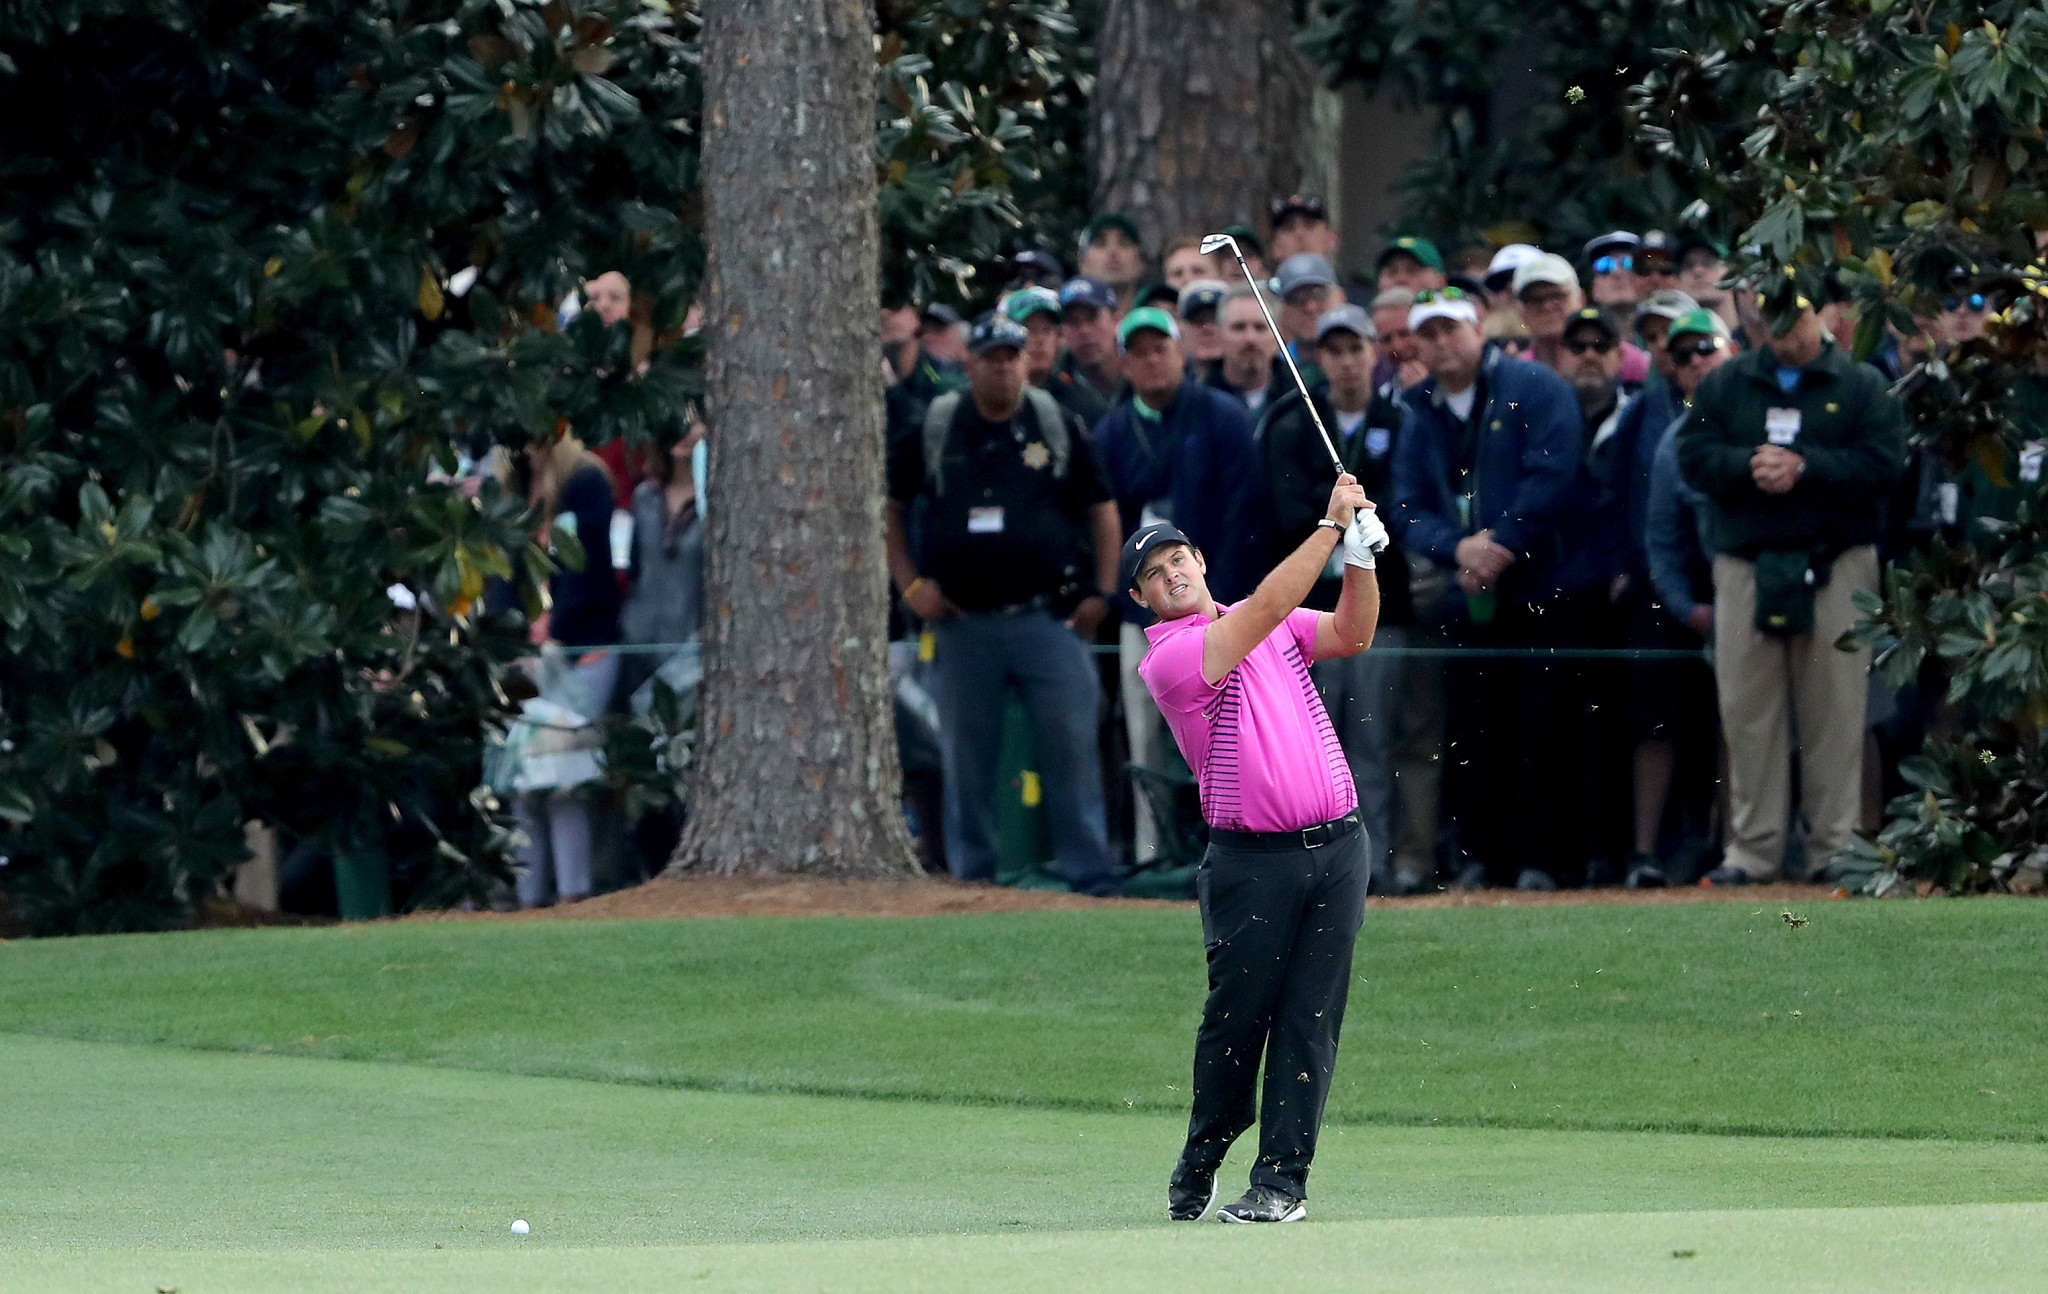 Patrick Reed claimed a one-shot victory at The Masters ©Getty Images